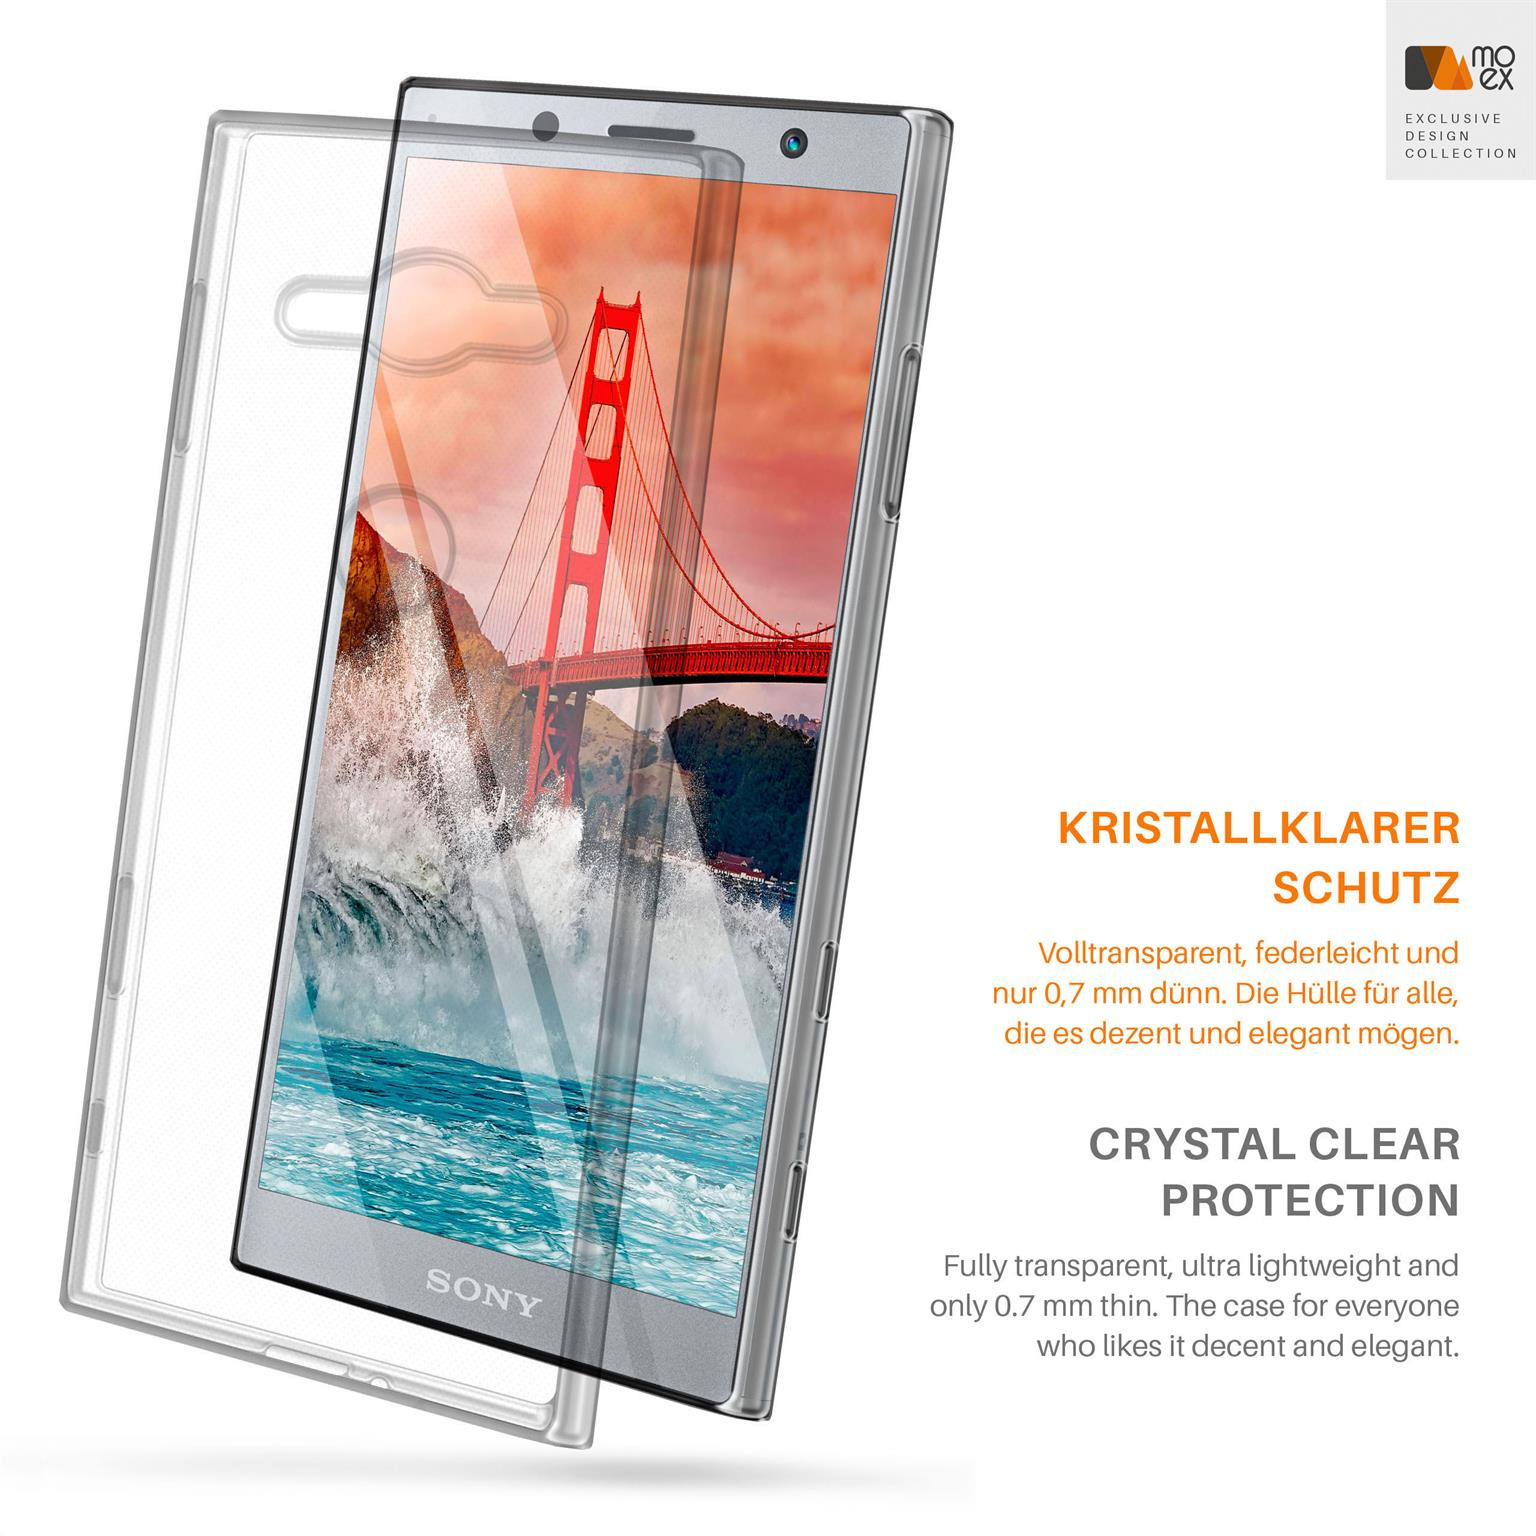 Sony, Crystal-Clear Backcover, MOEX XZ2 Aero Compact, Xperia Case,